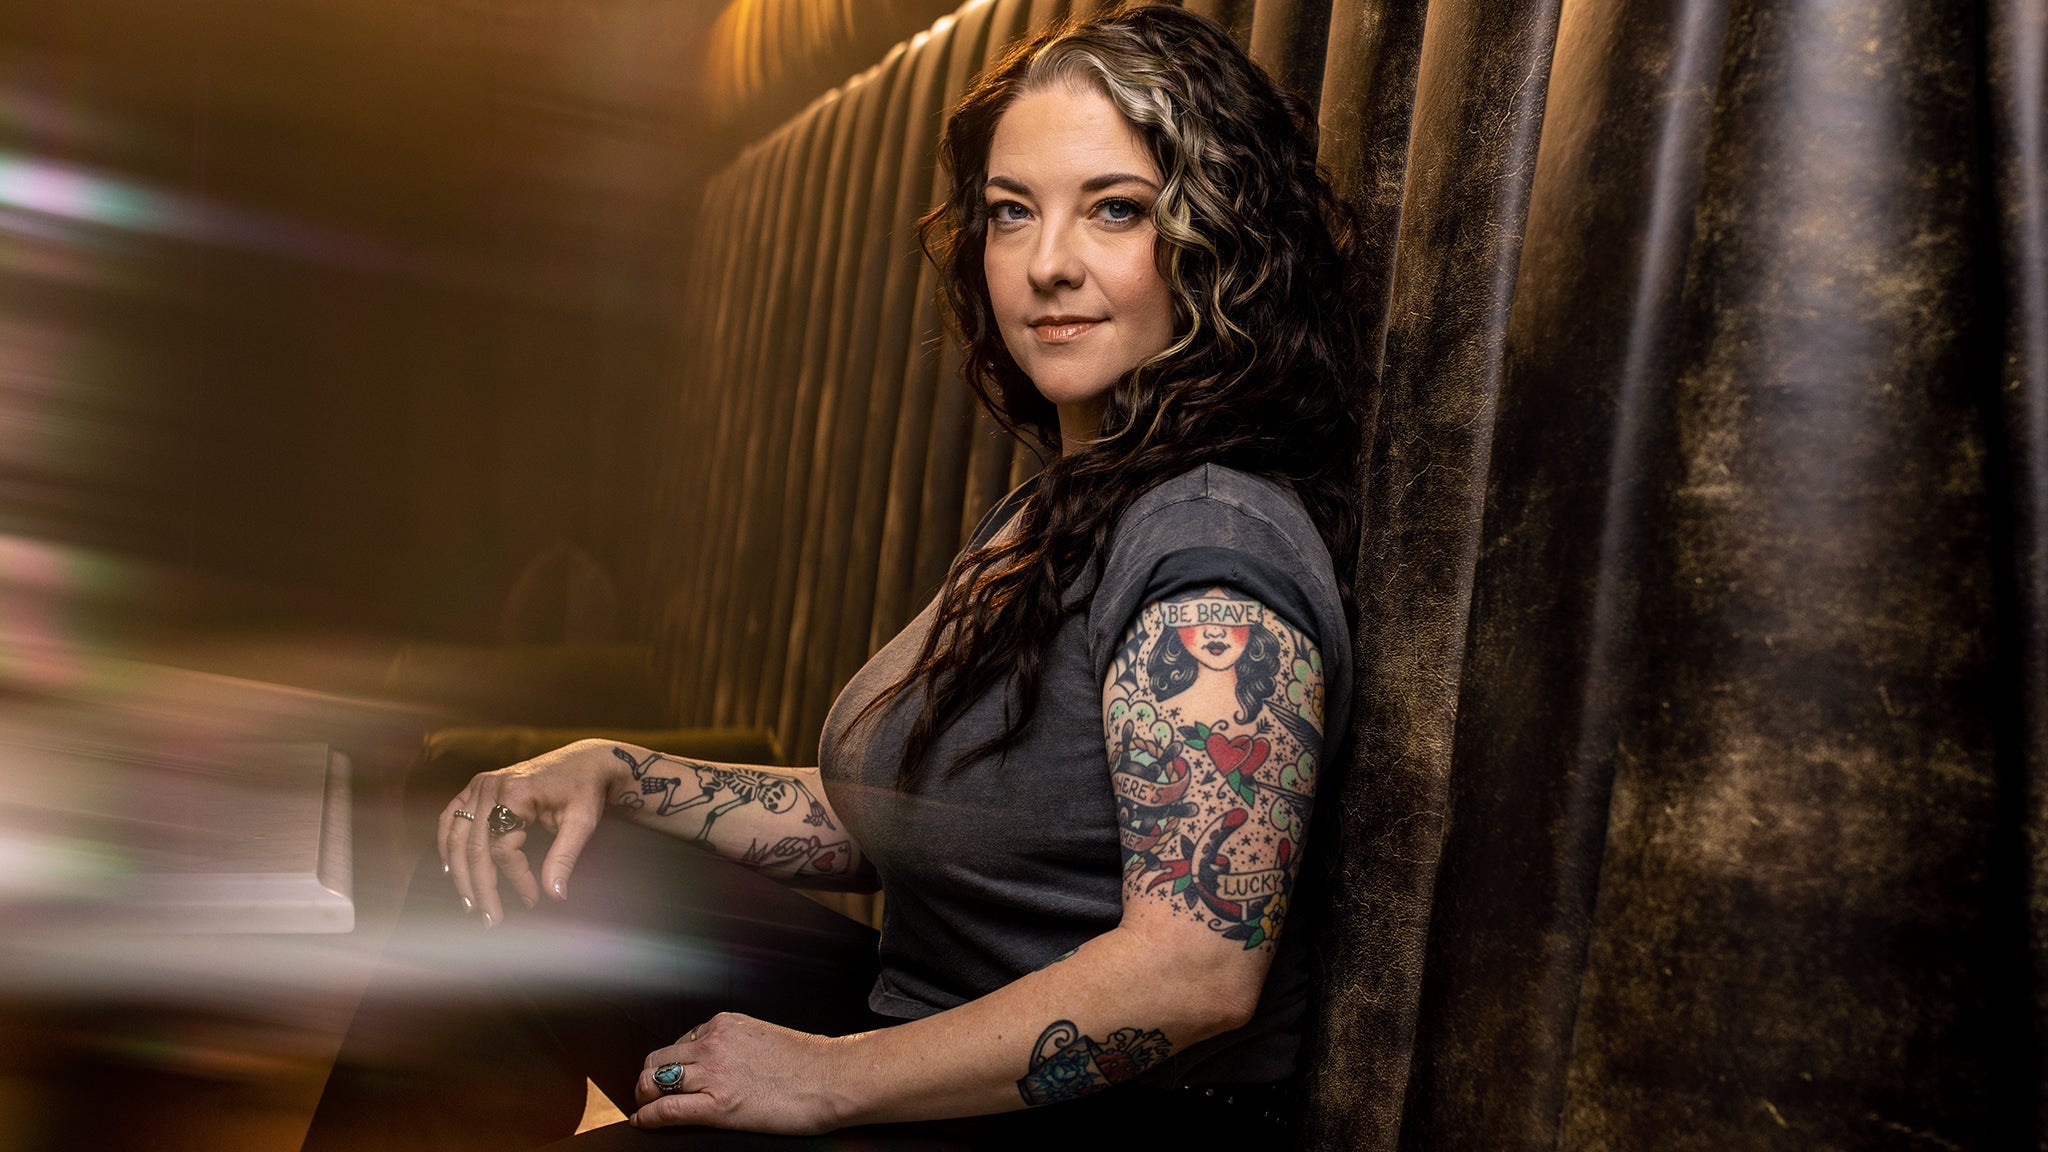 Ashley McBryde presale password for real tickets in Henderson